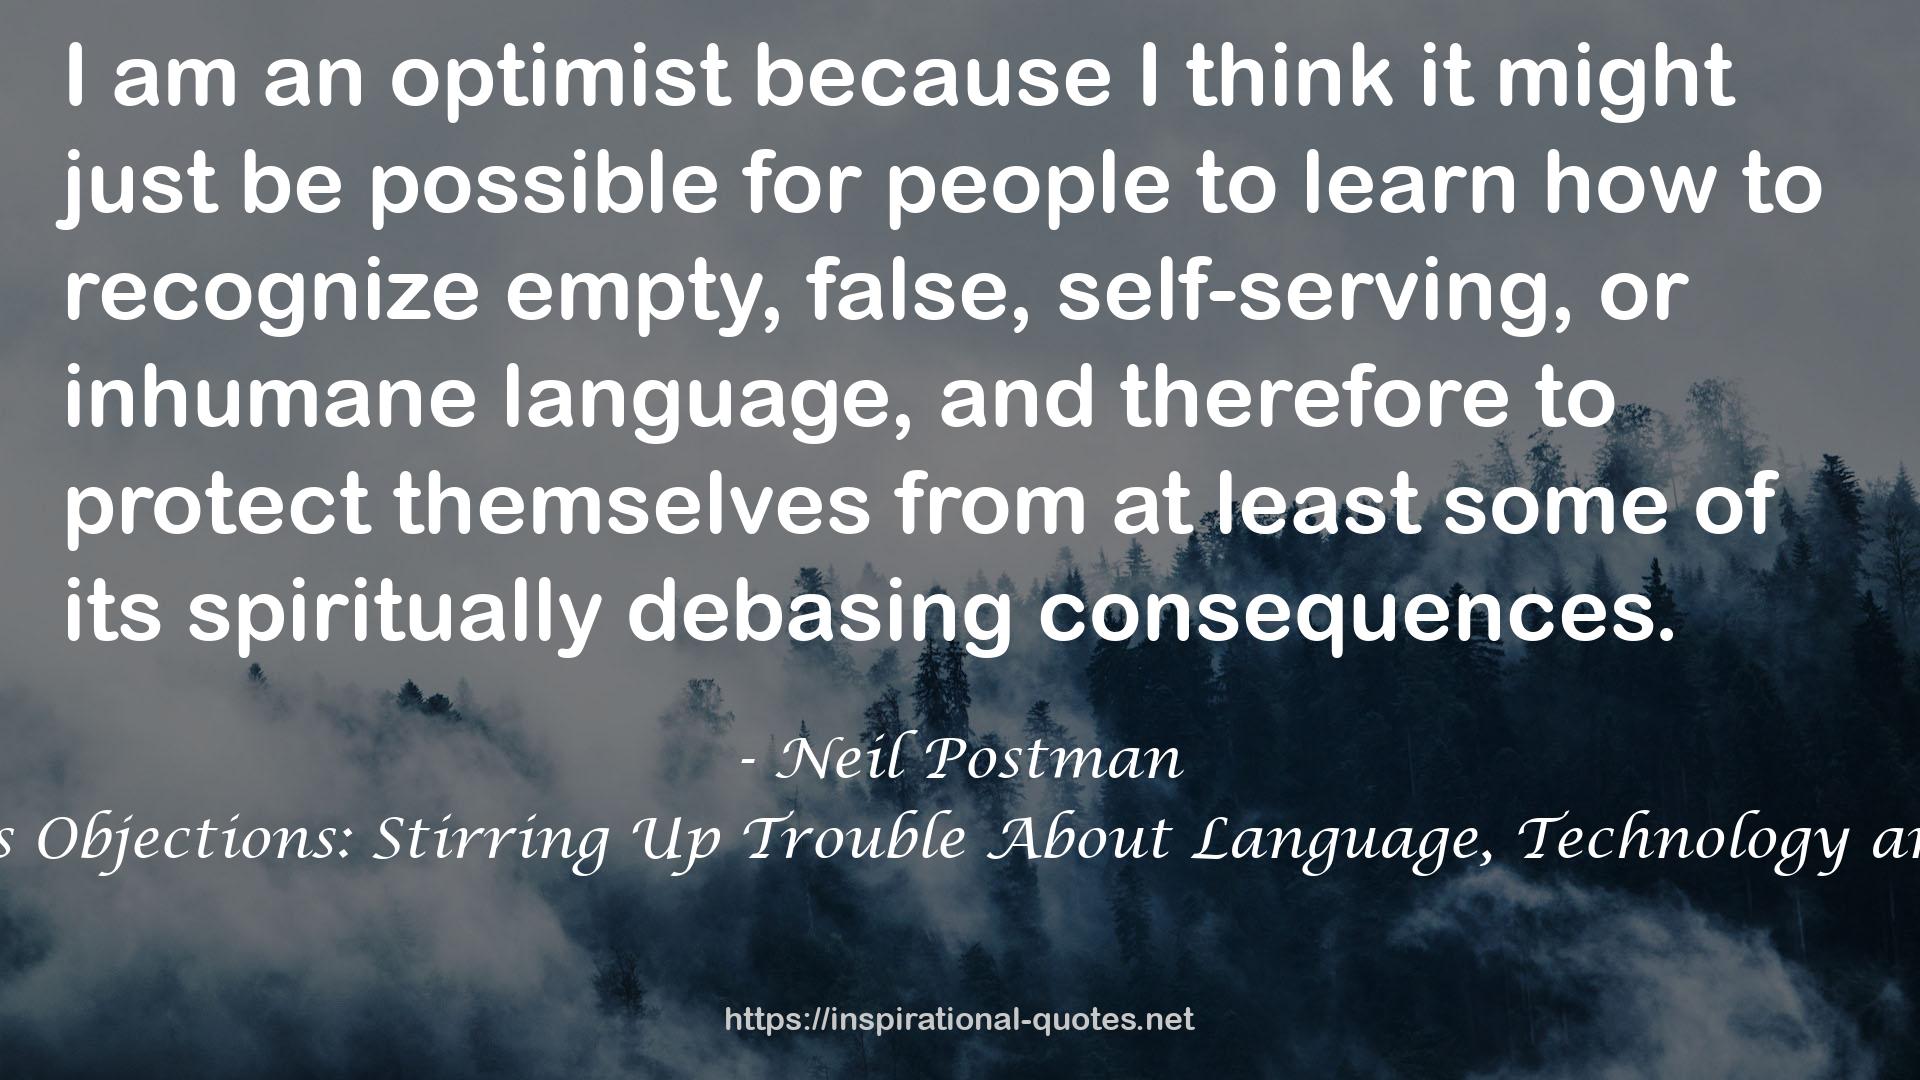 Conscientious Objections: Stirring Up Trouble About Language, Technology and Education QUOTES